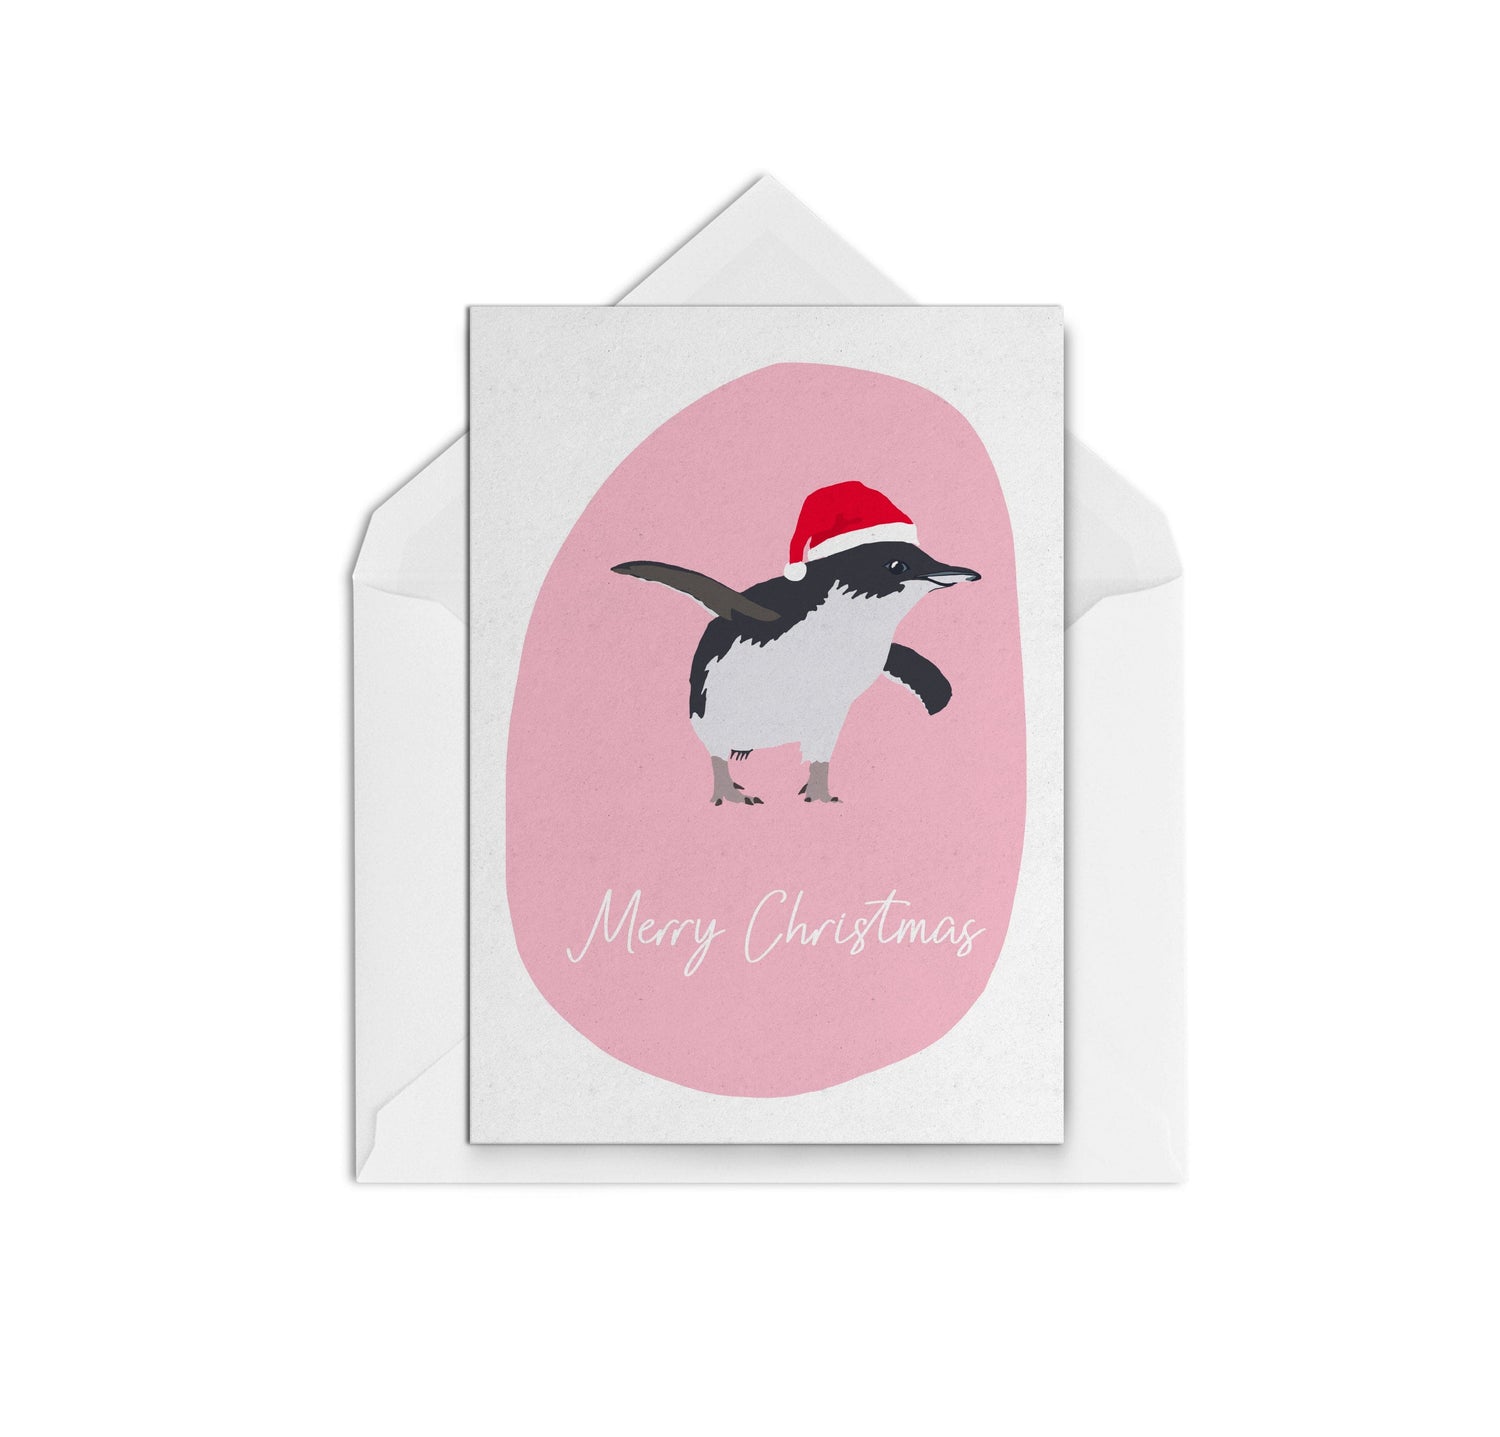 Pack Of 20 Christmas Cards - The Paper People Greeting Cards